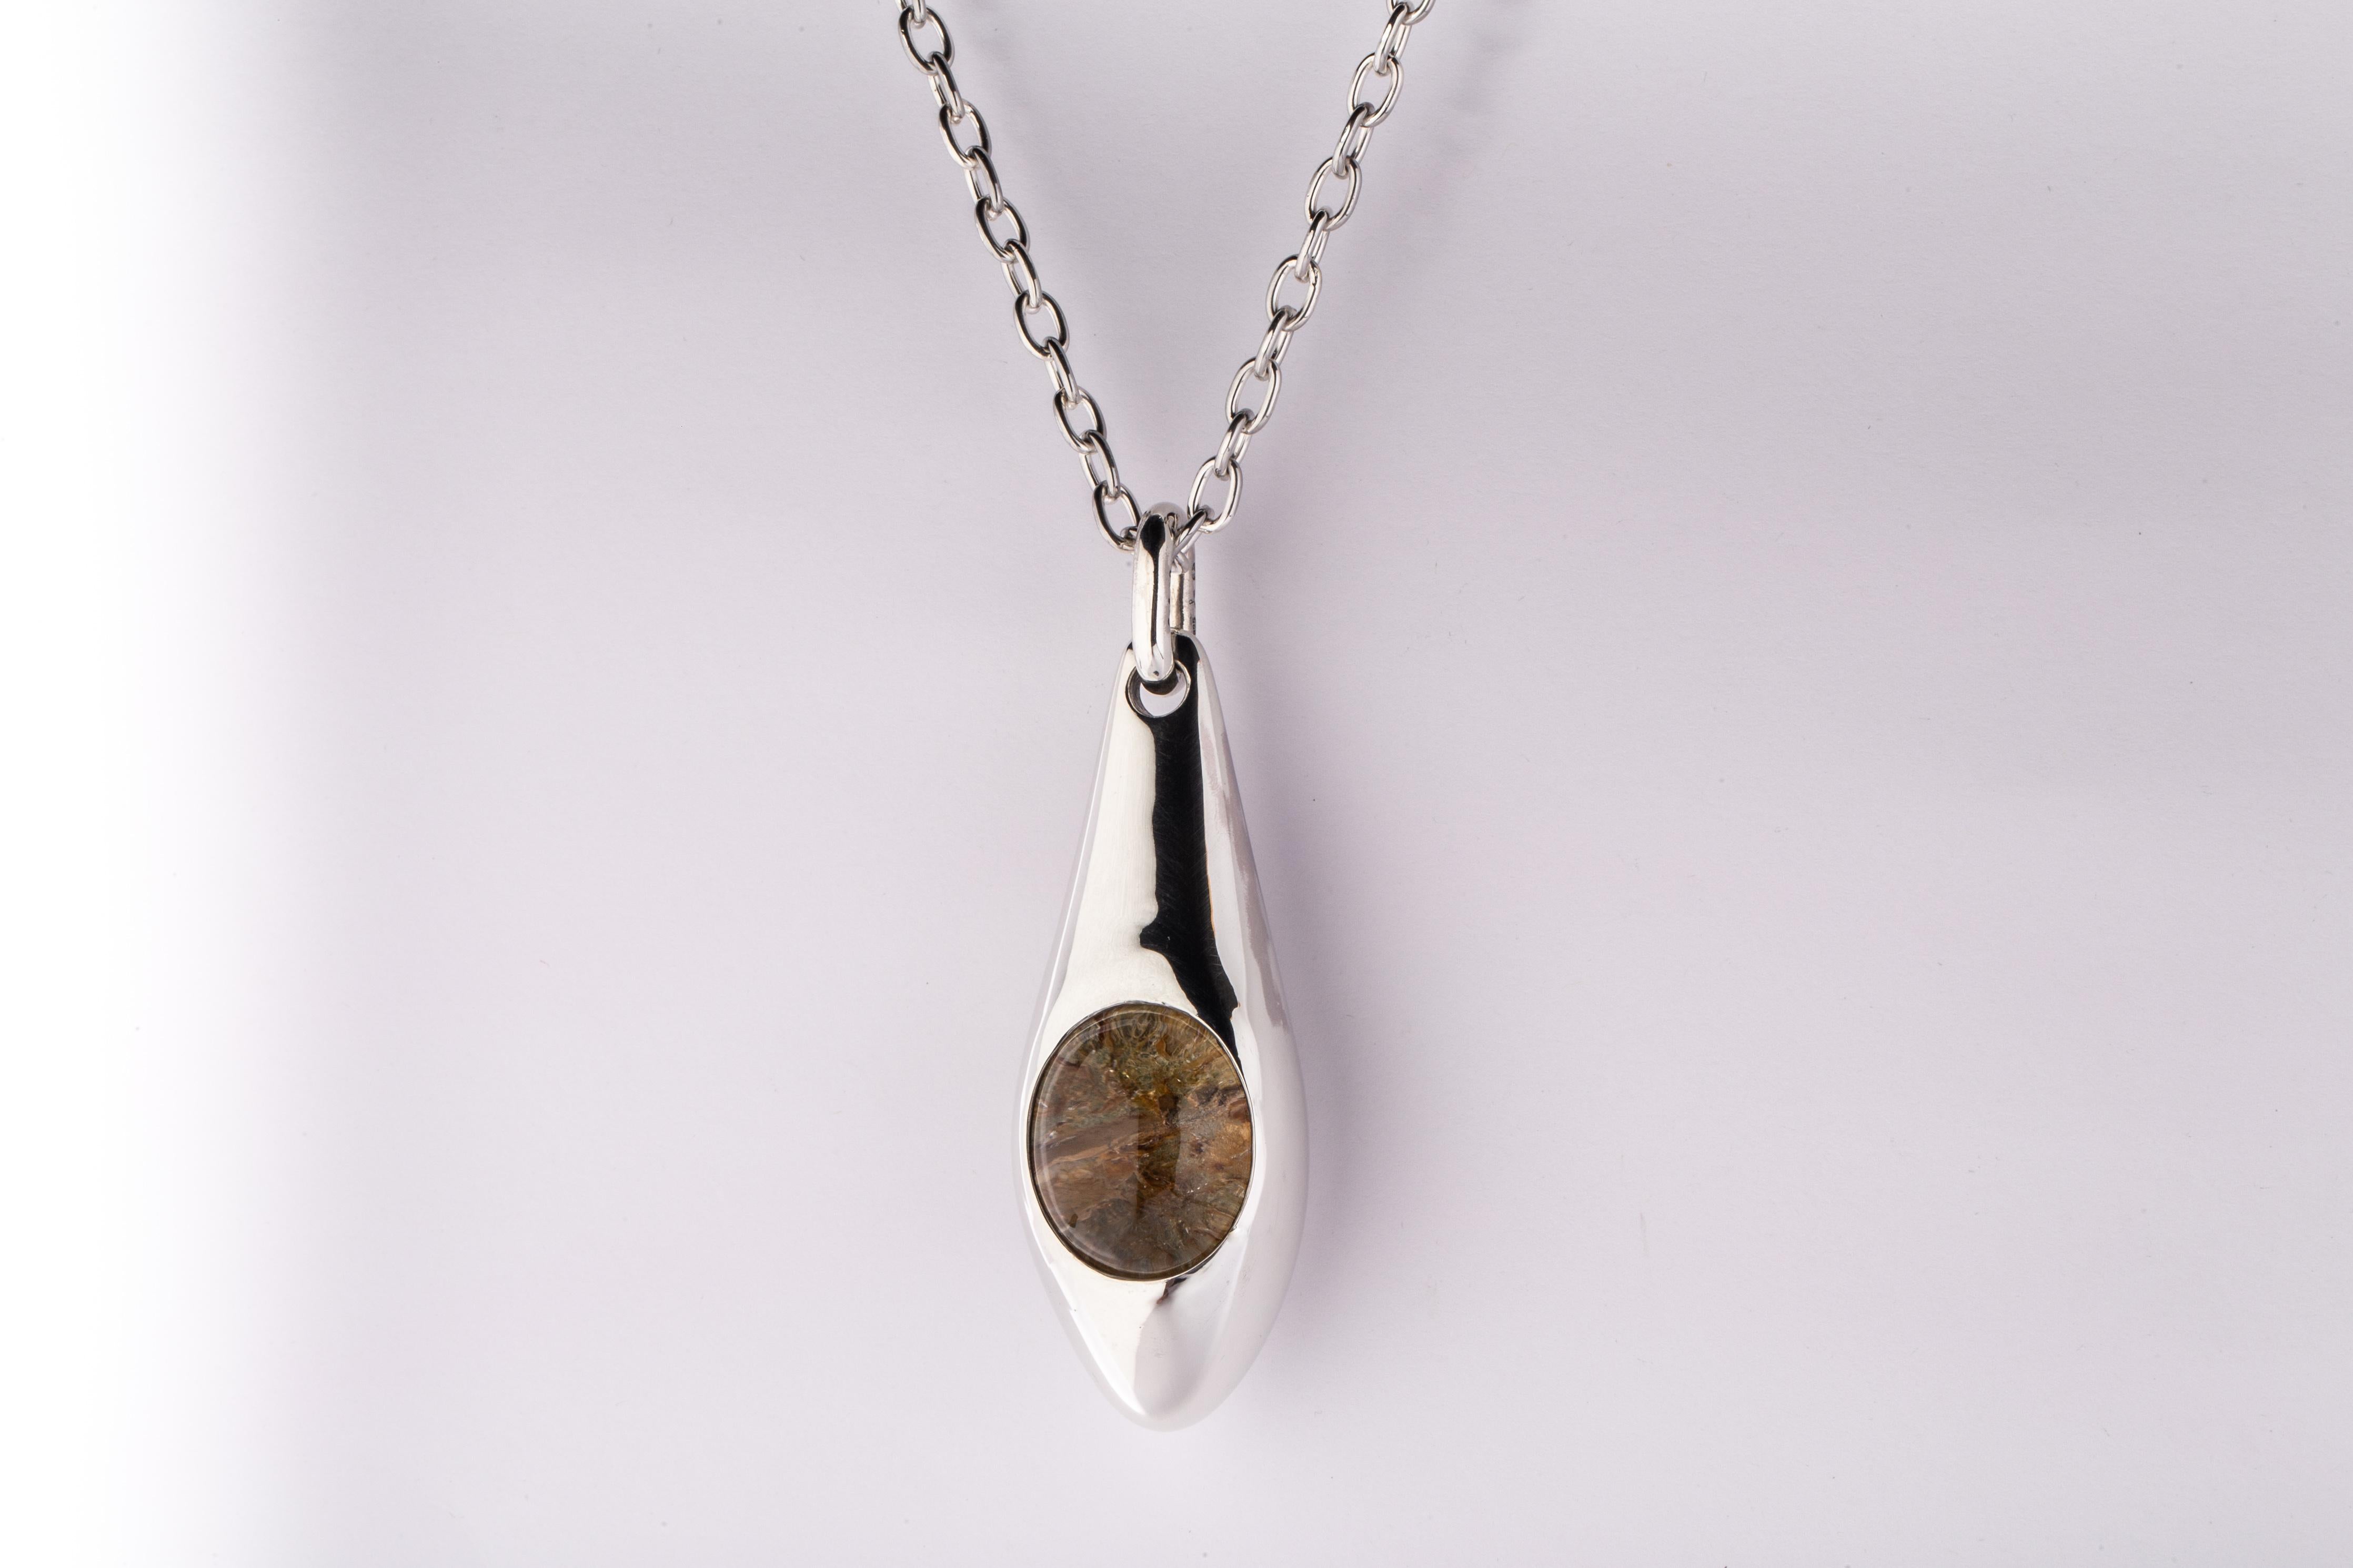 Necklace in polished sterling silver and a slab of rough garden quartz. It comes on 74 cm sterling silver chain.